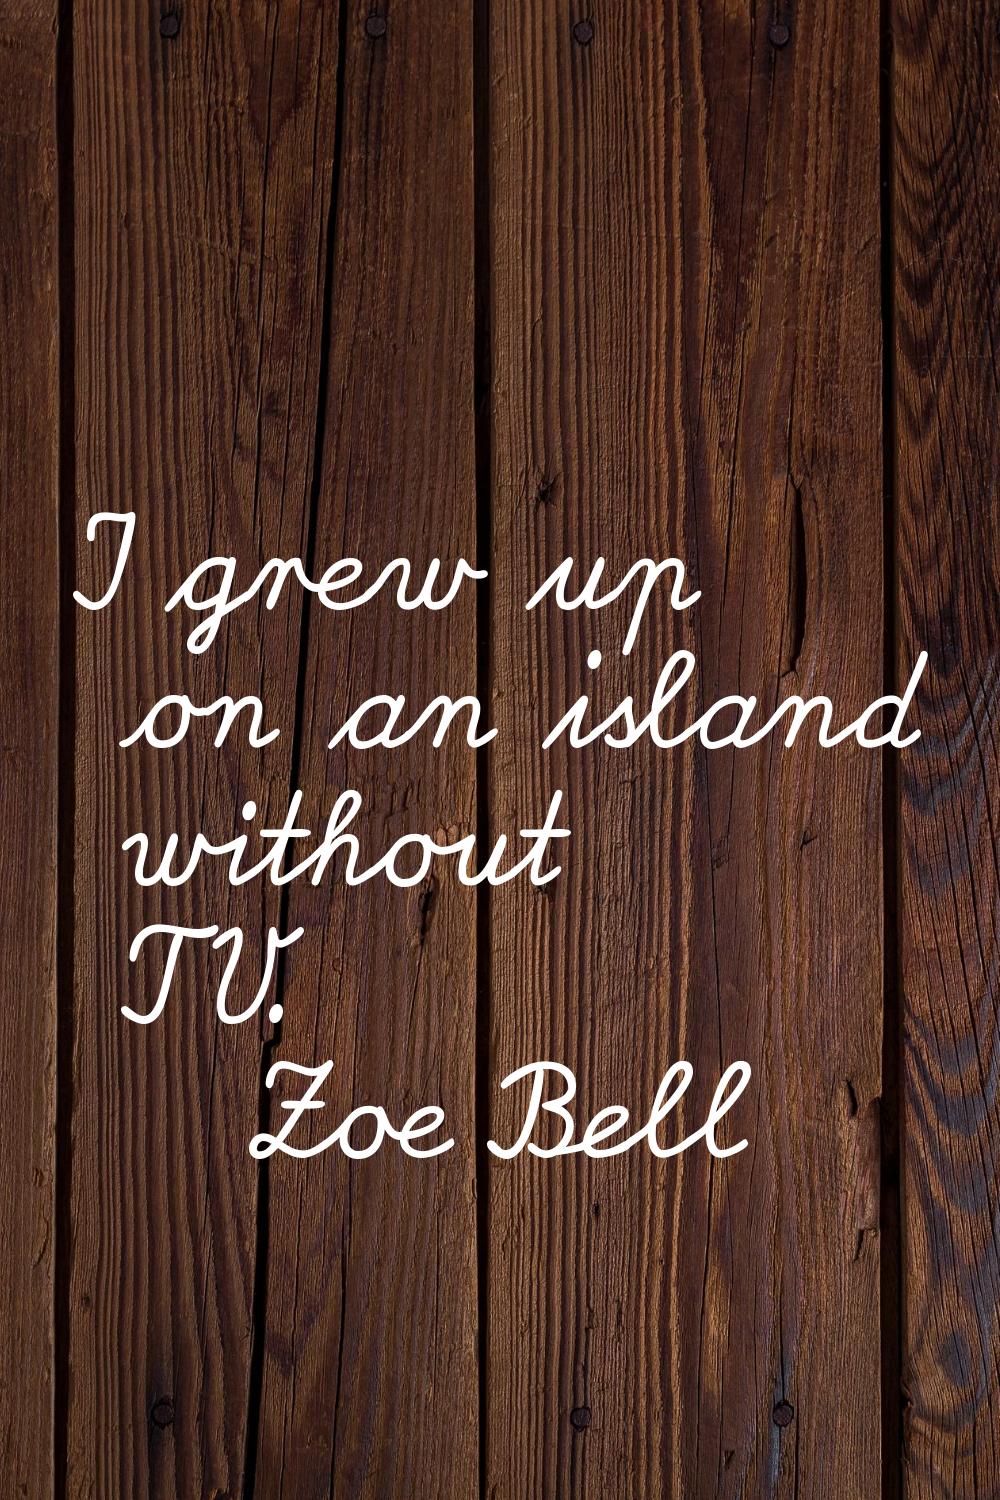 I grew up on an island without TV.